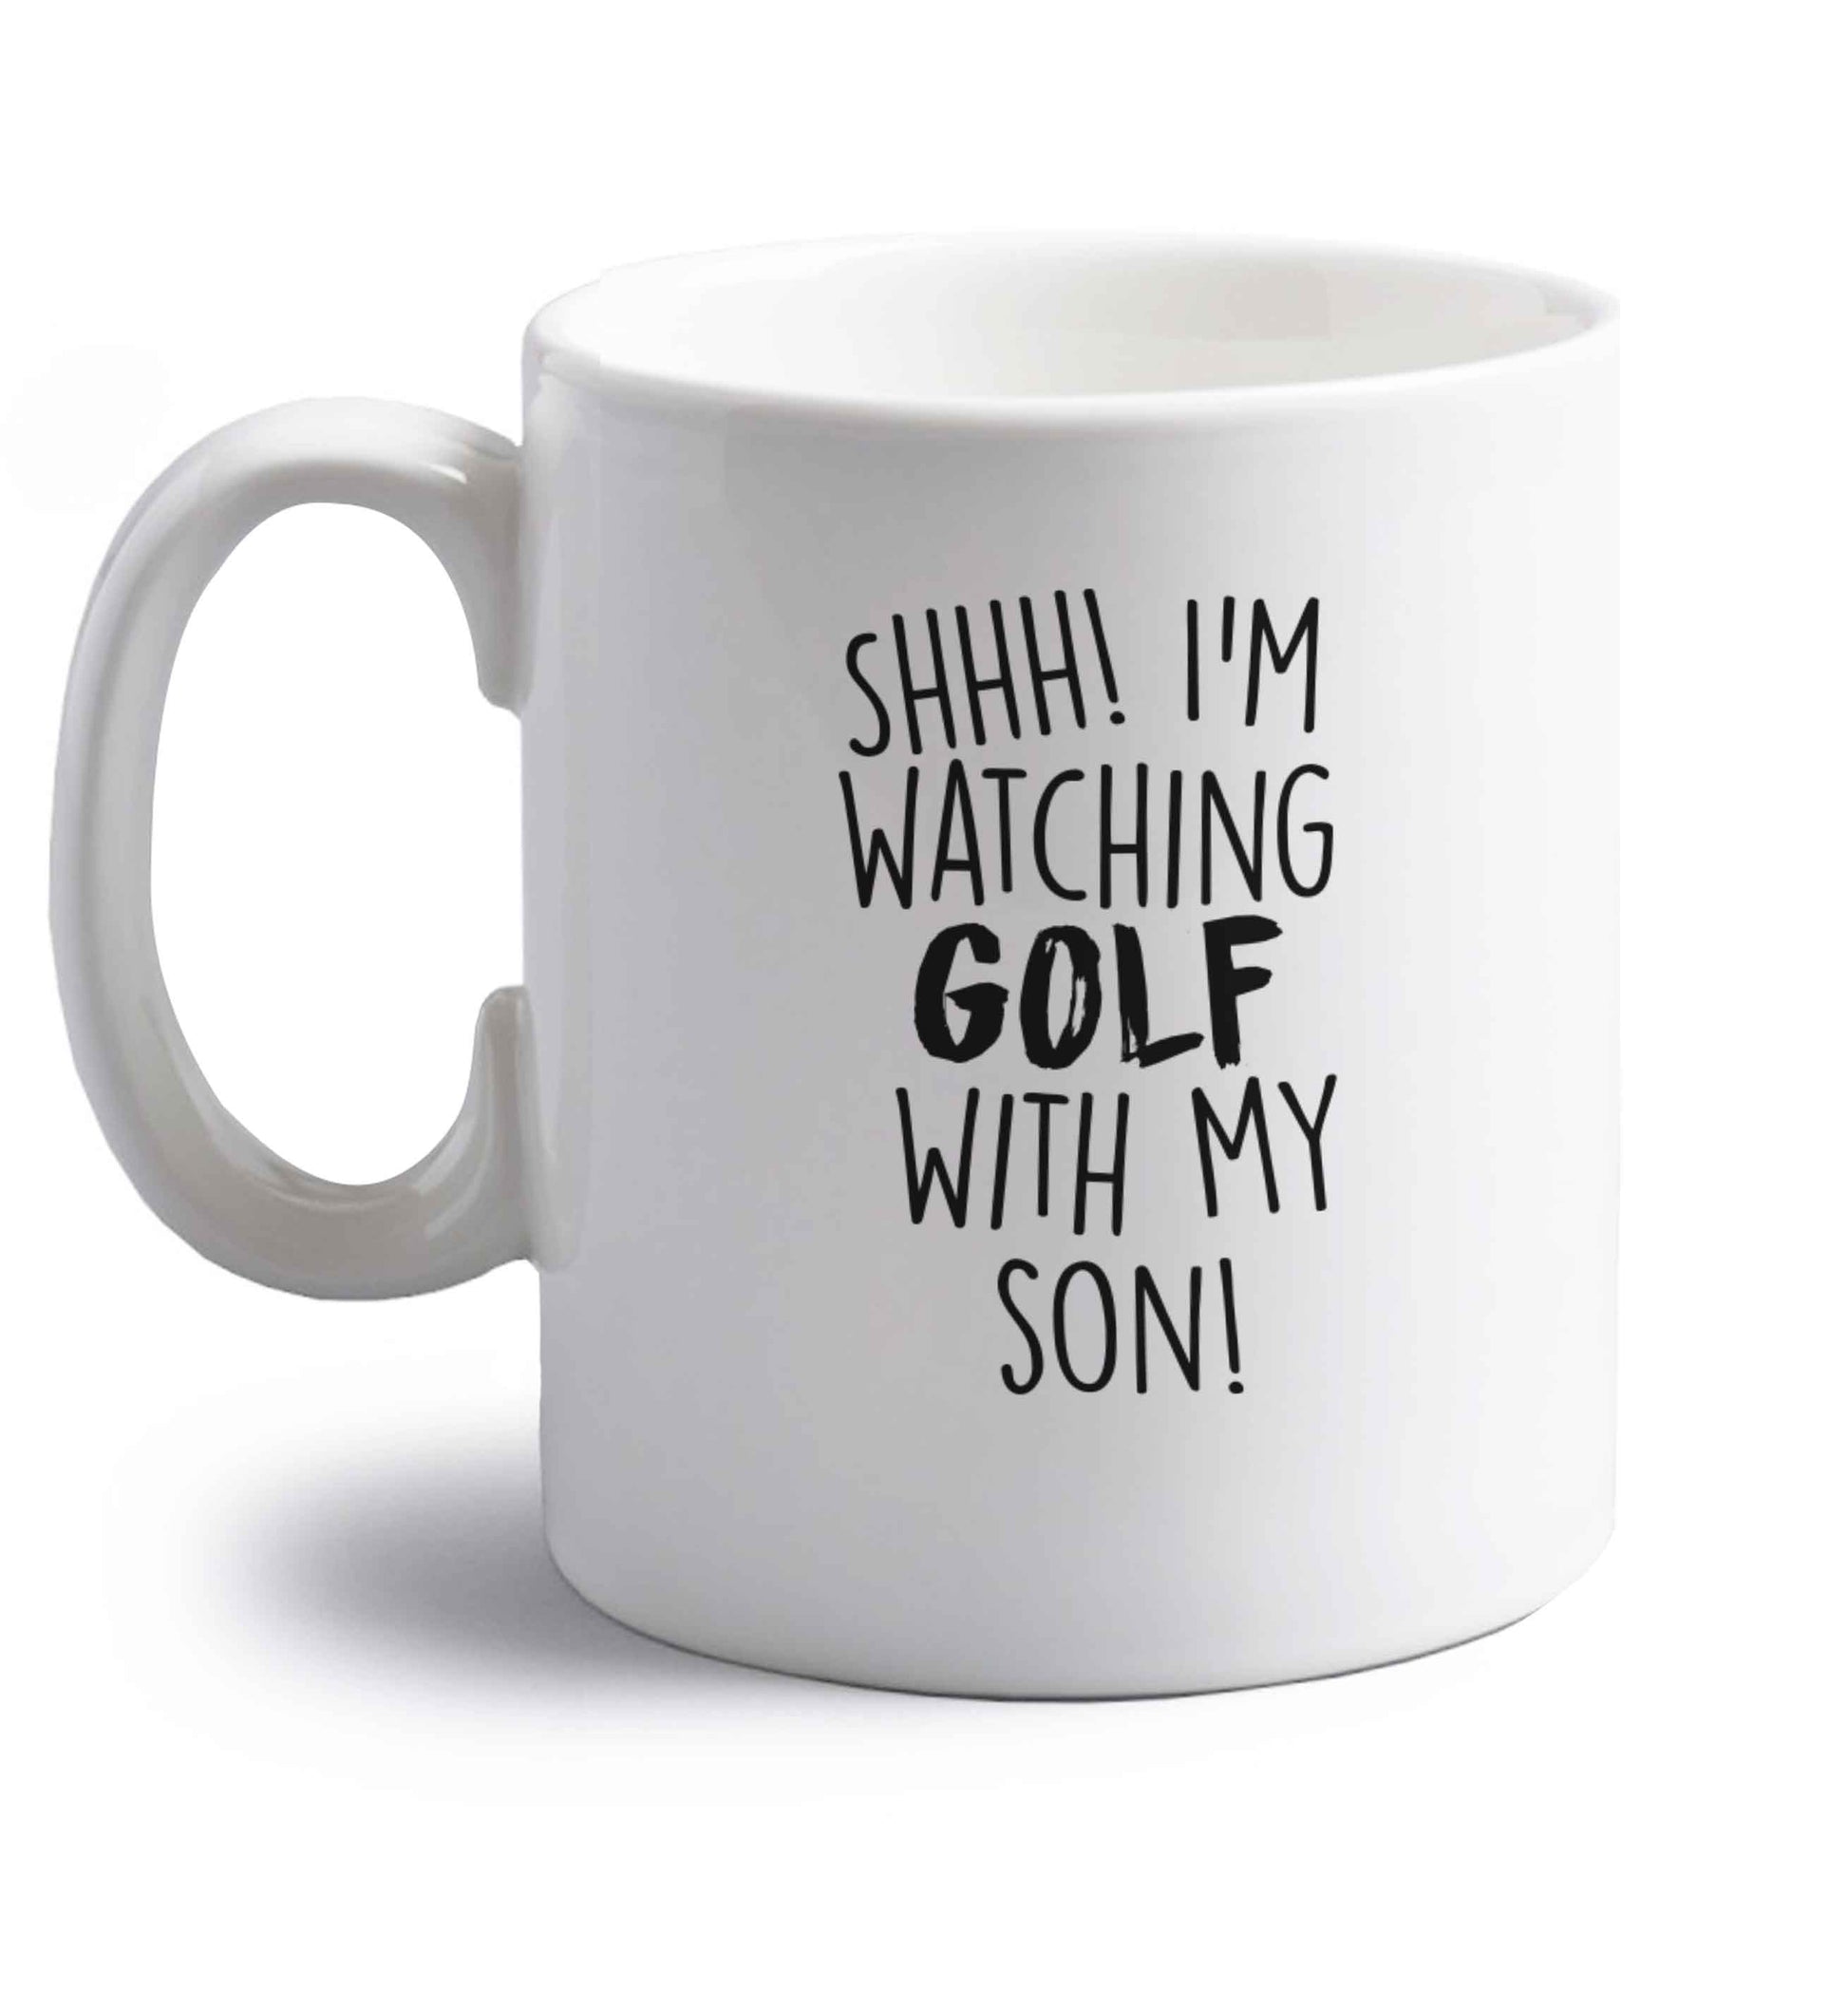 Shh I'm watching golf with my son right handed white ceramic mug 